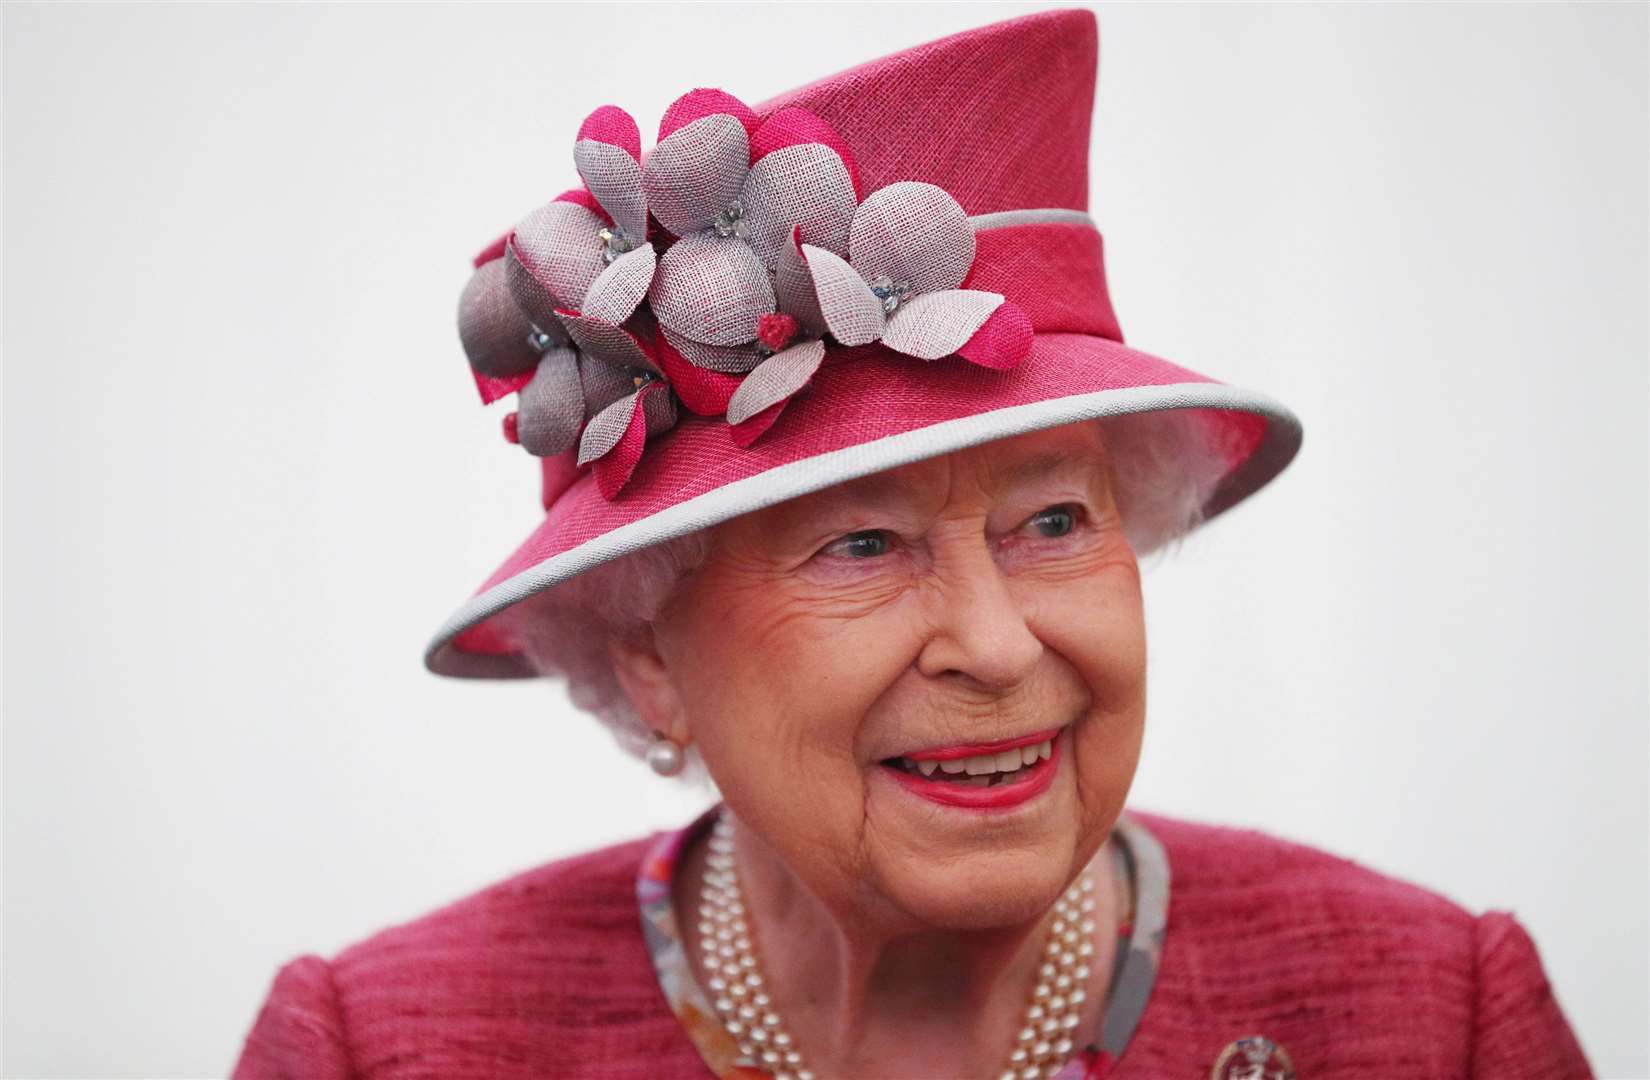 Royal expert Joe Little says Queen will remain committed to her role as head of state (Hannah McKay/PA)